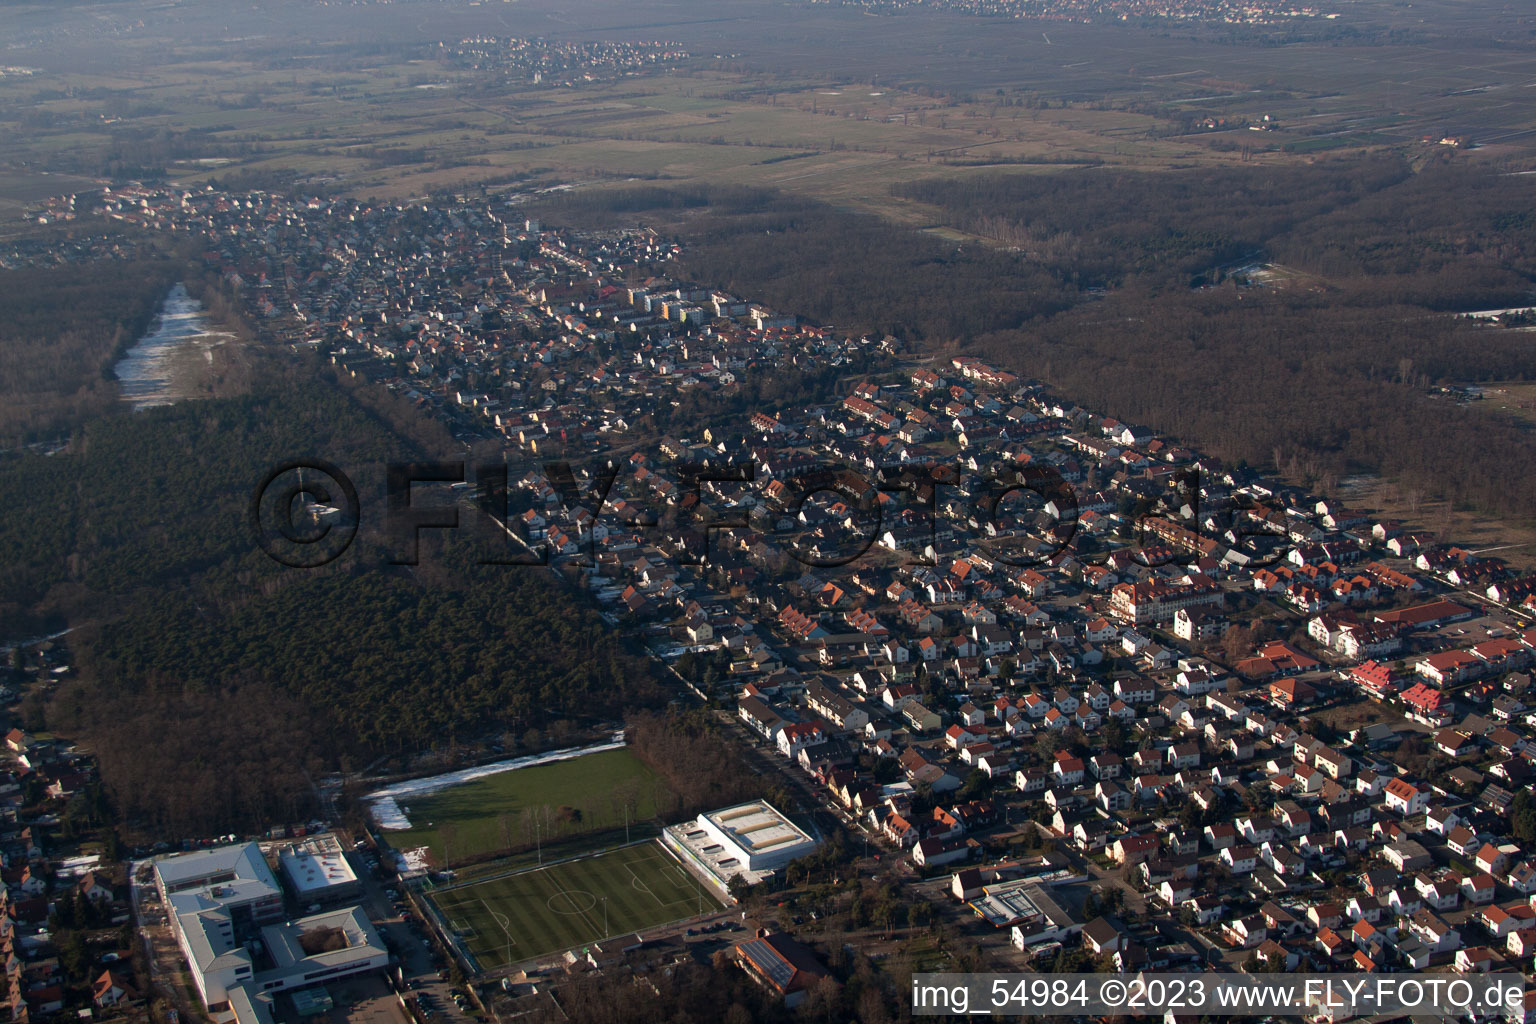 Aerial view of Maxdorf in the state Rhineland-Palatinate, Germany